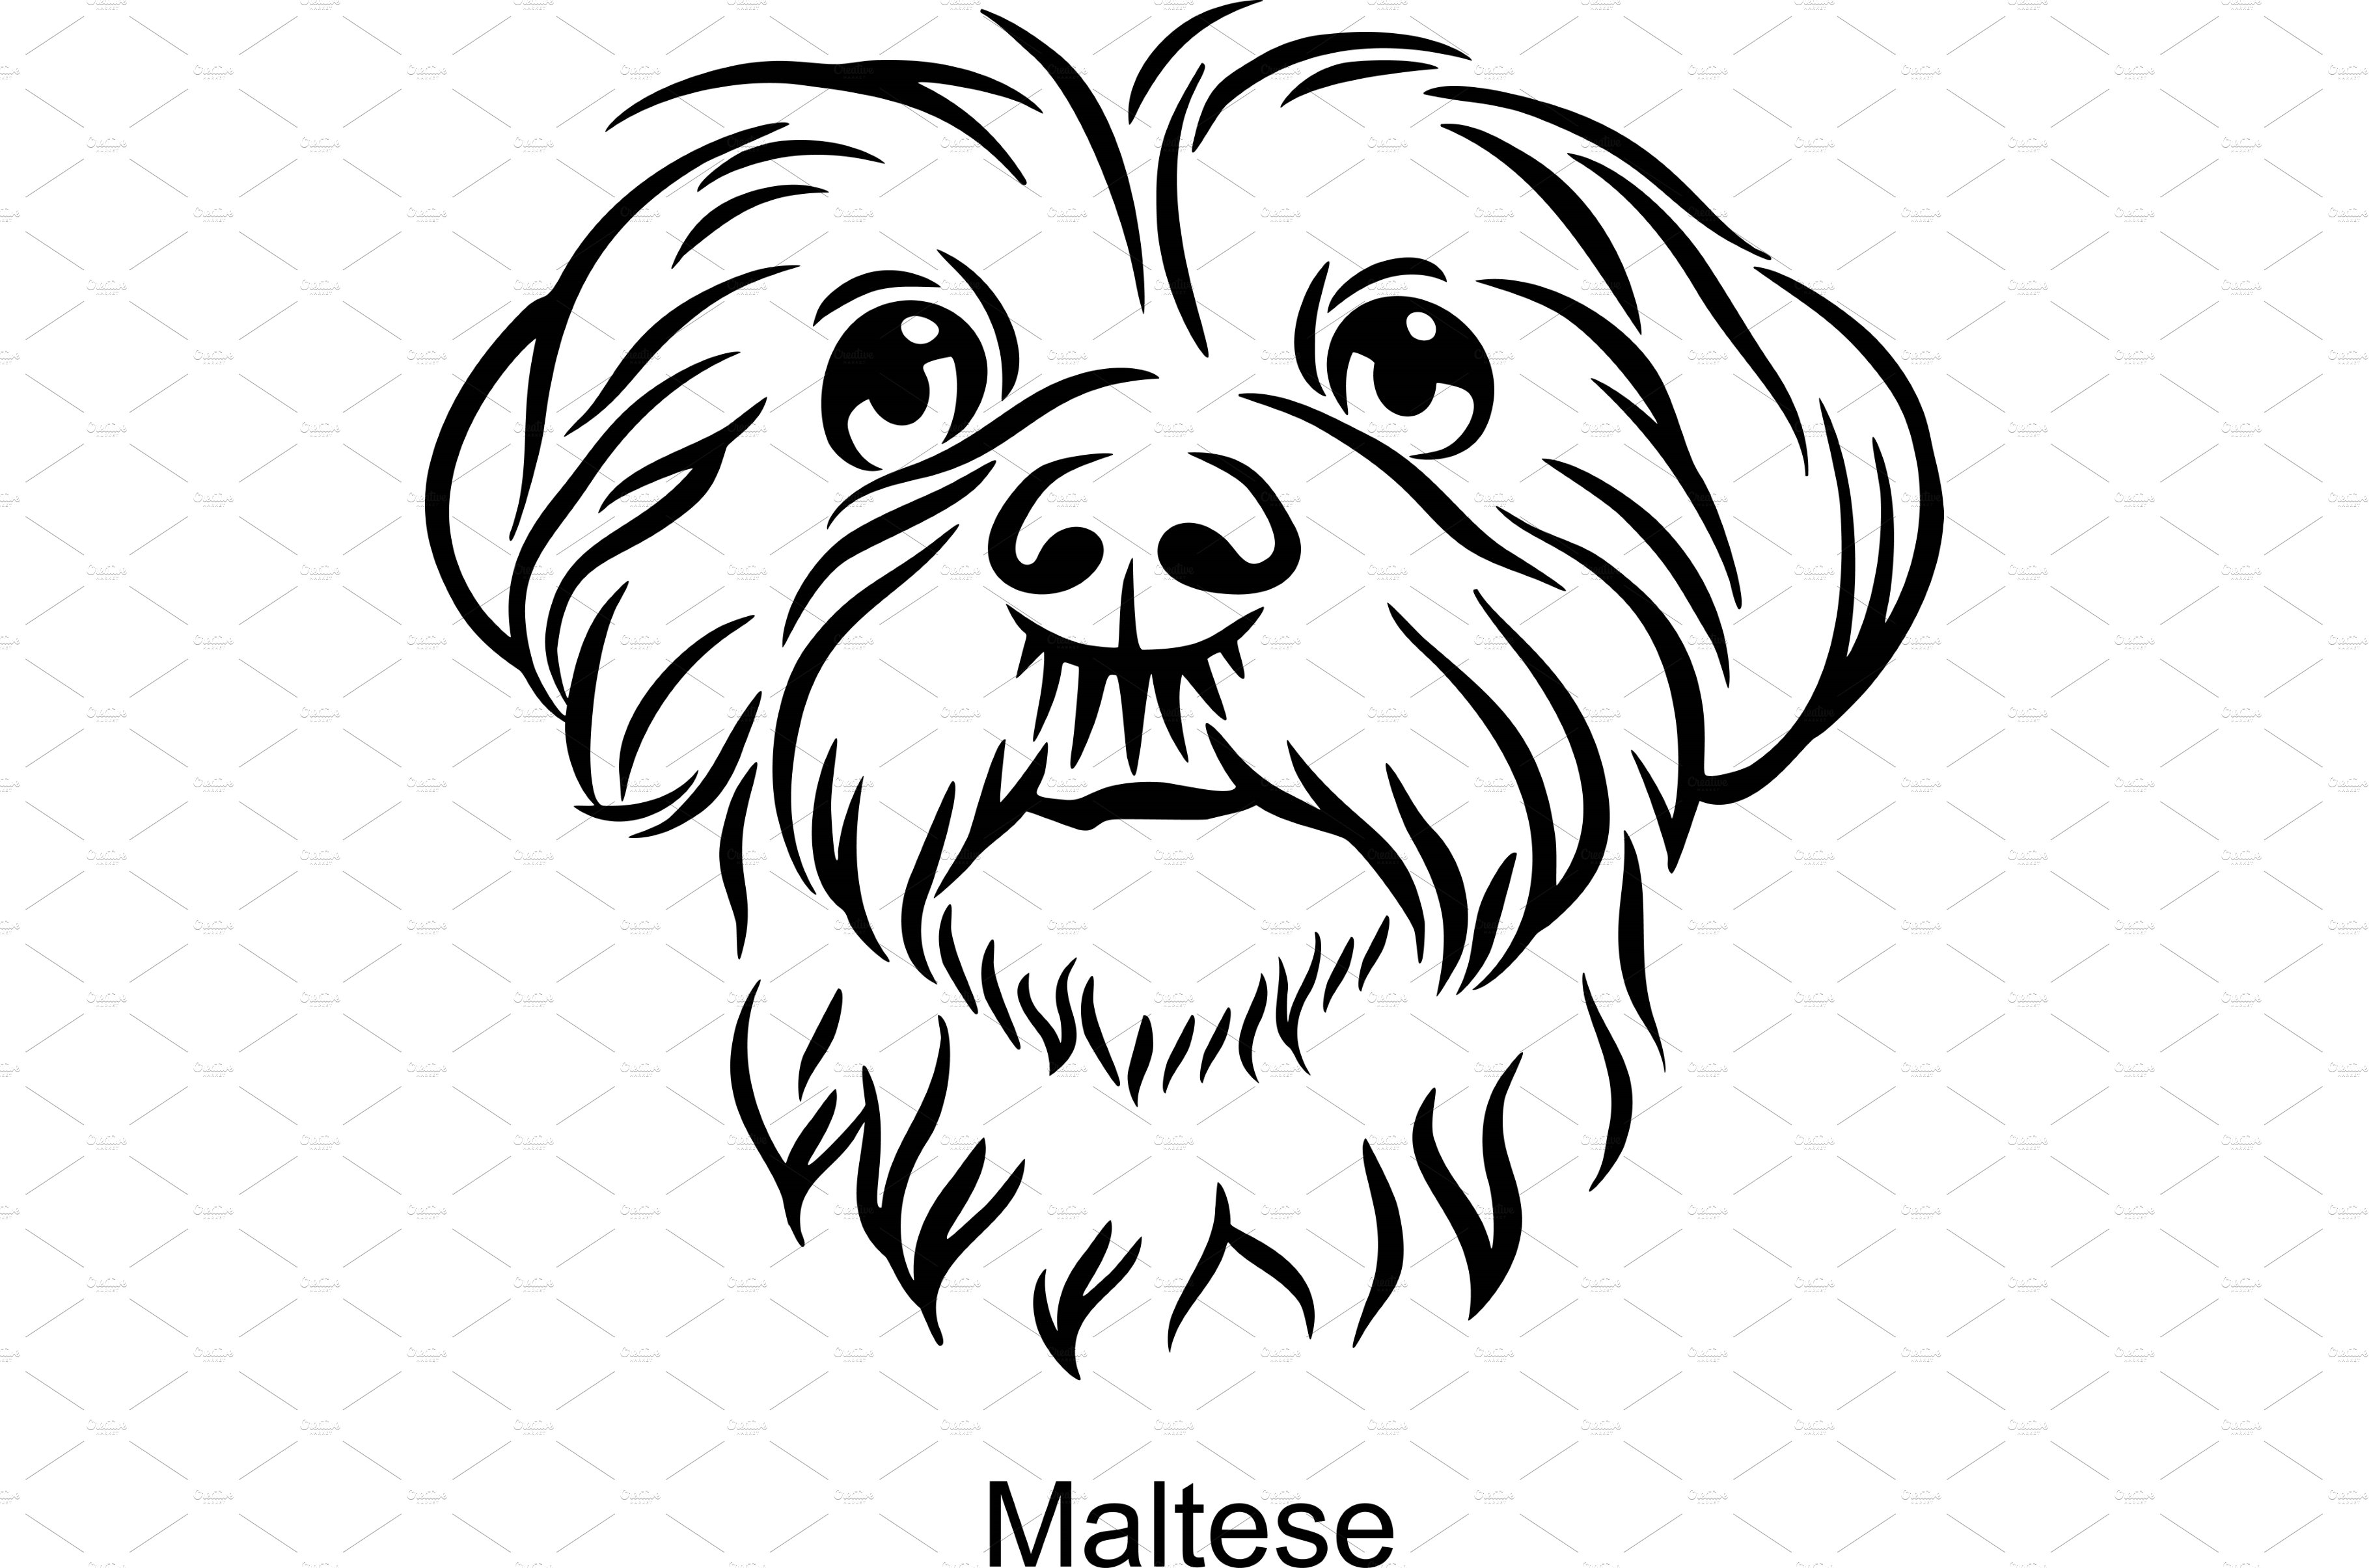 Maltese Portrait Dog in Line style - cover image.